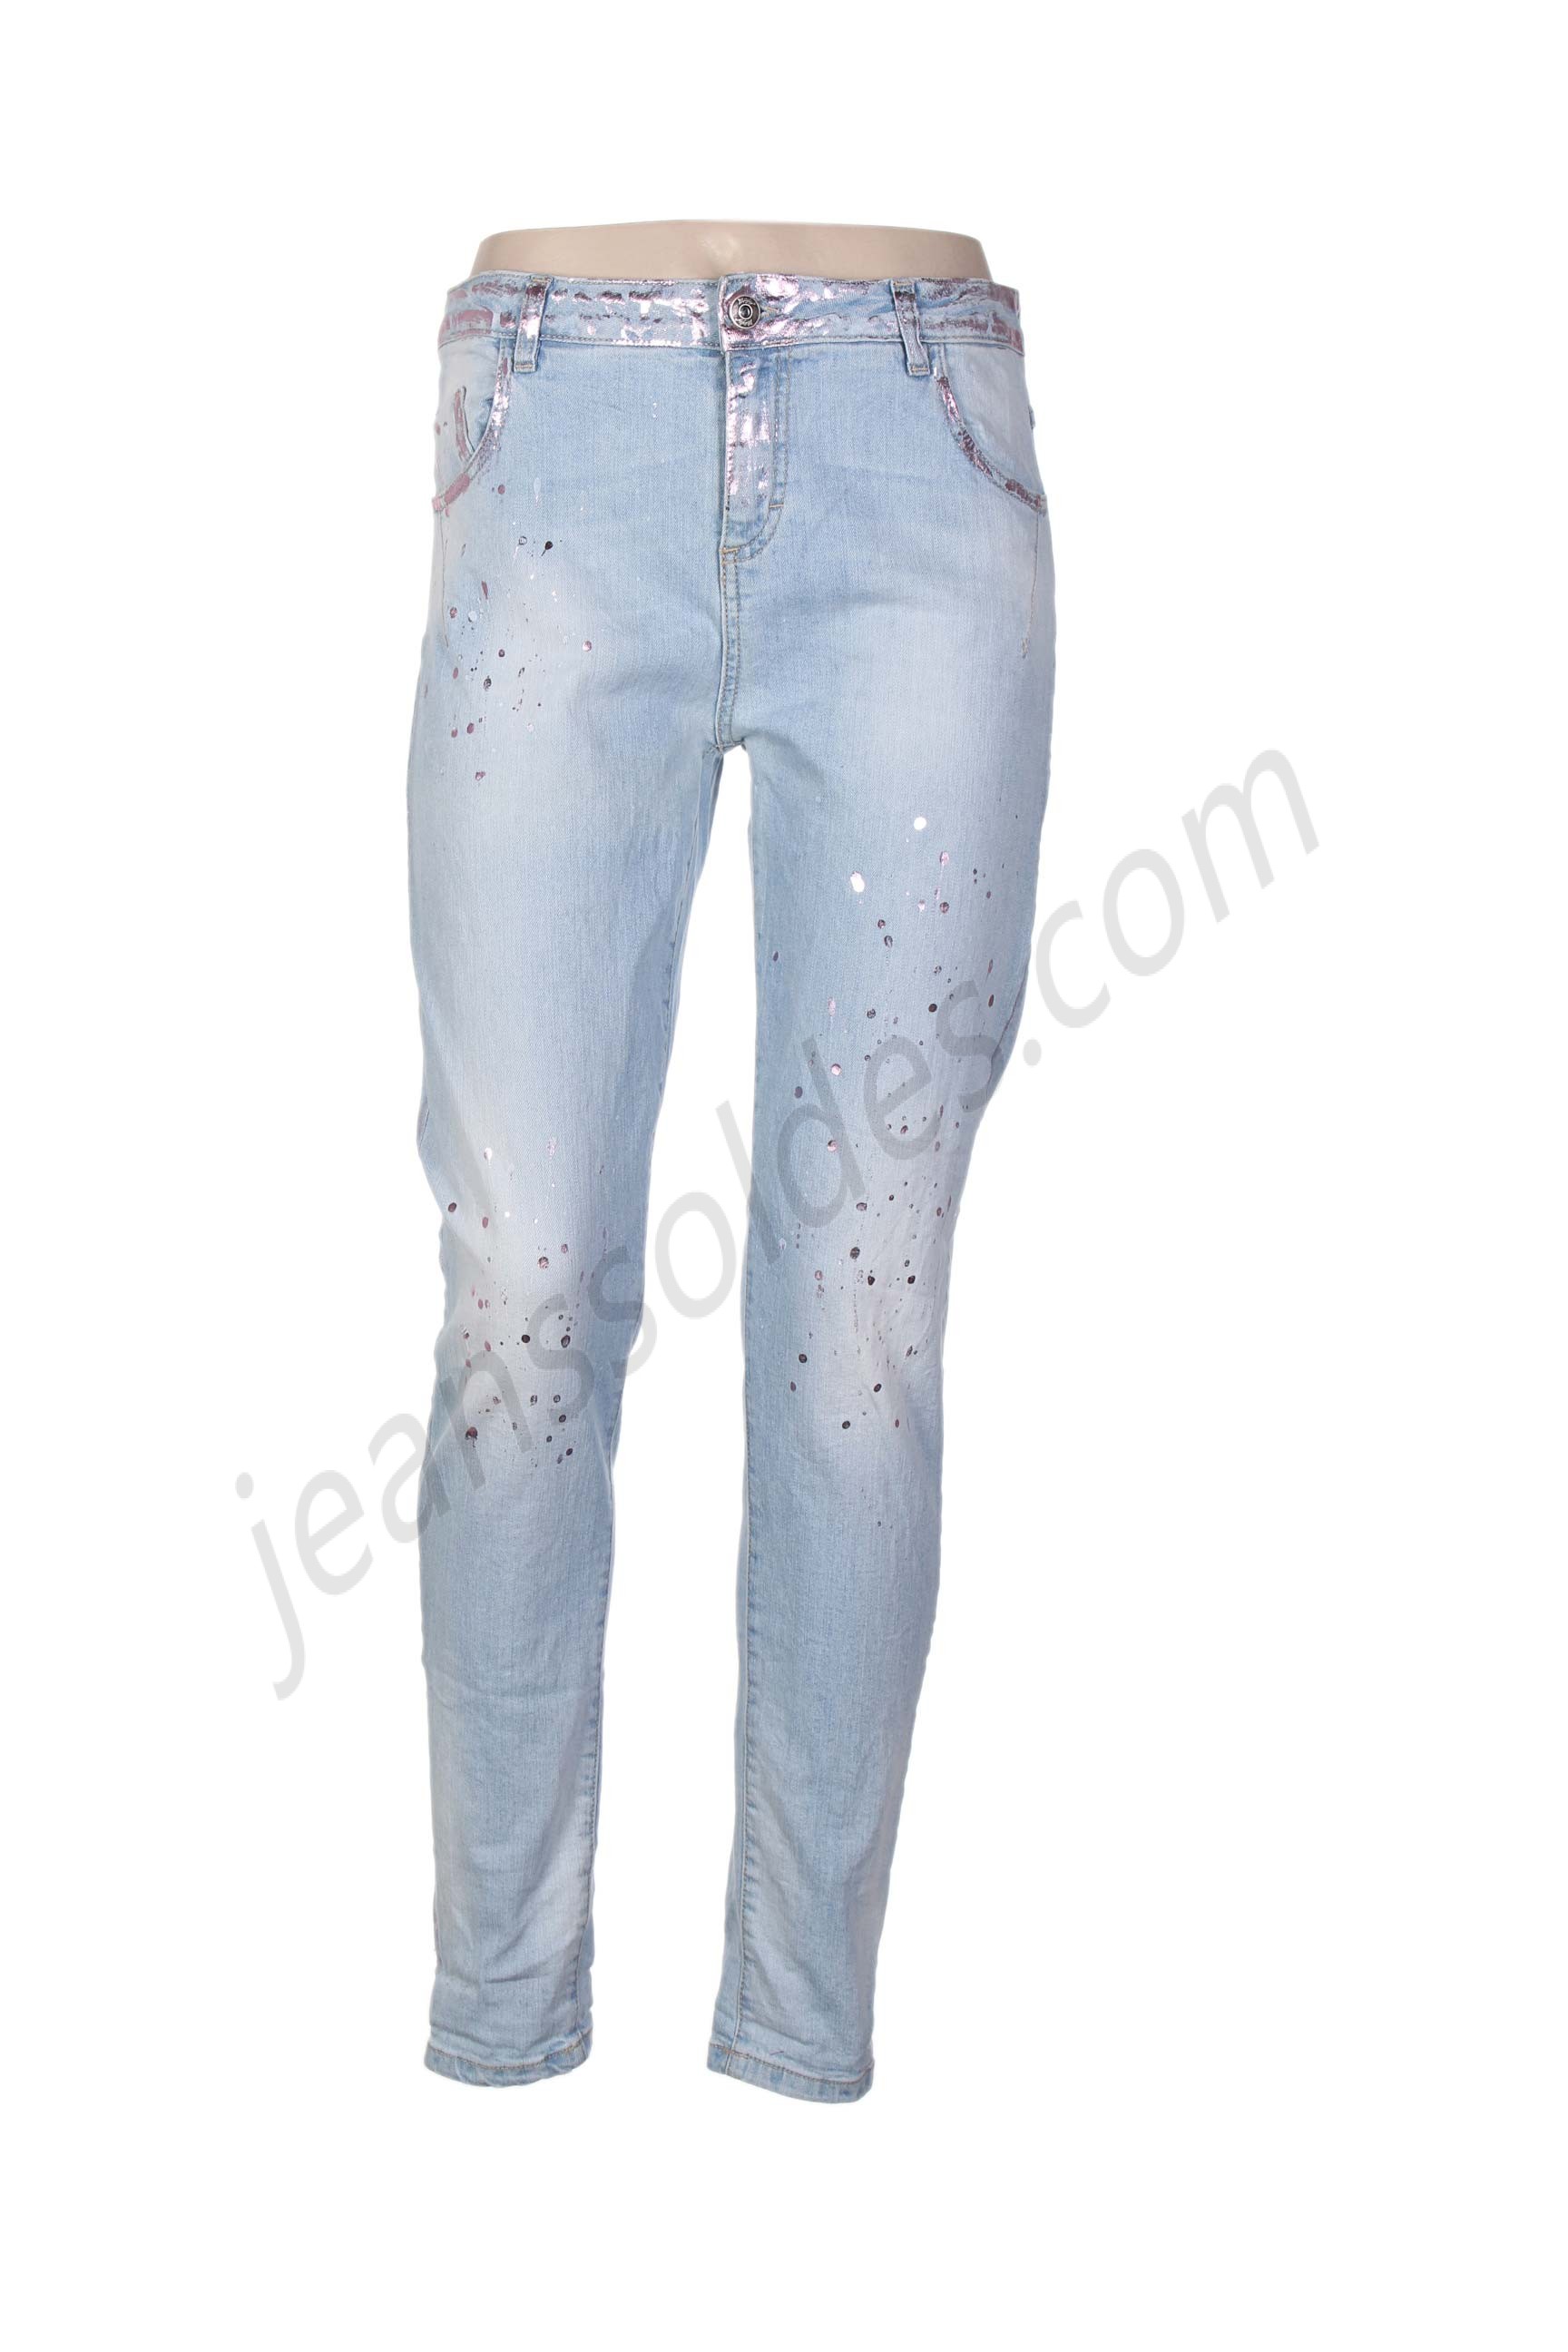 maryley-Jeans coupe slim prix d’amis - maryley-Jeans coupe slim prix d’amis